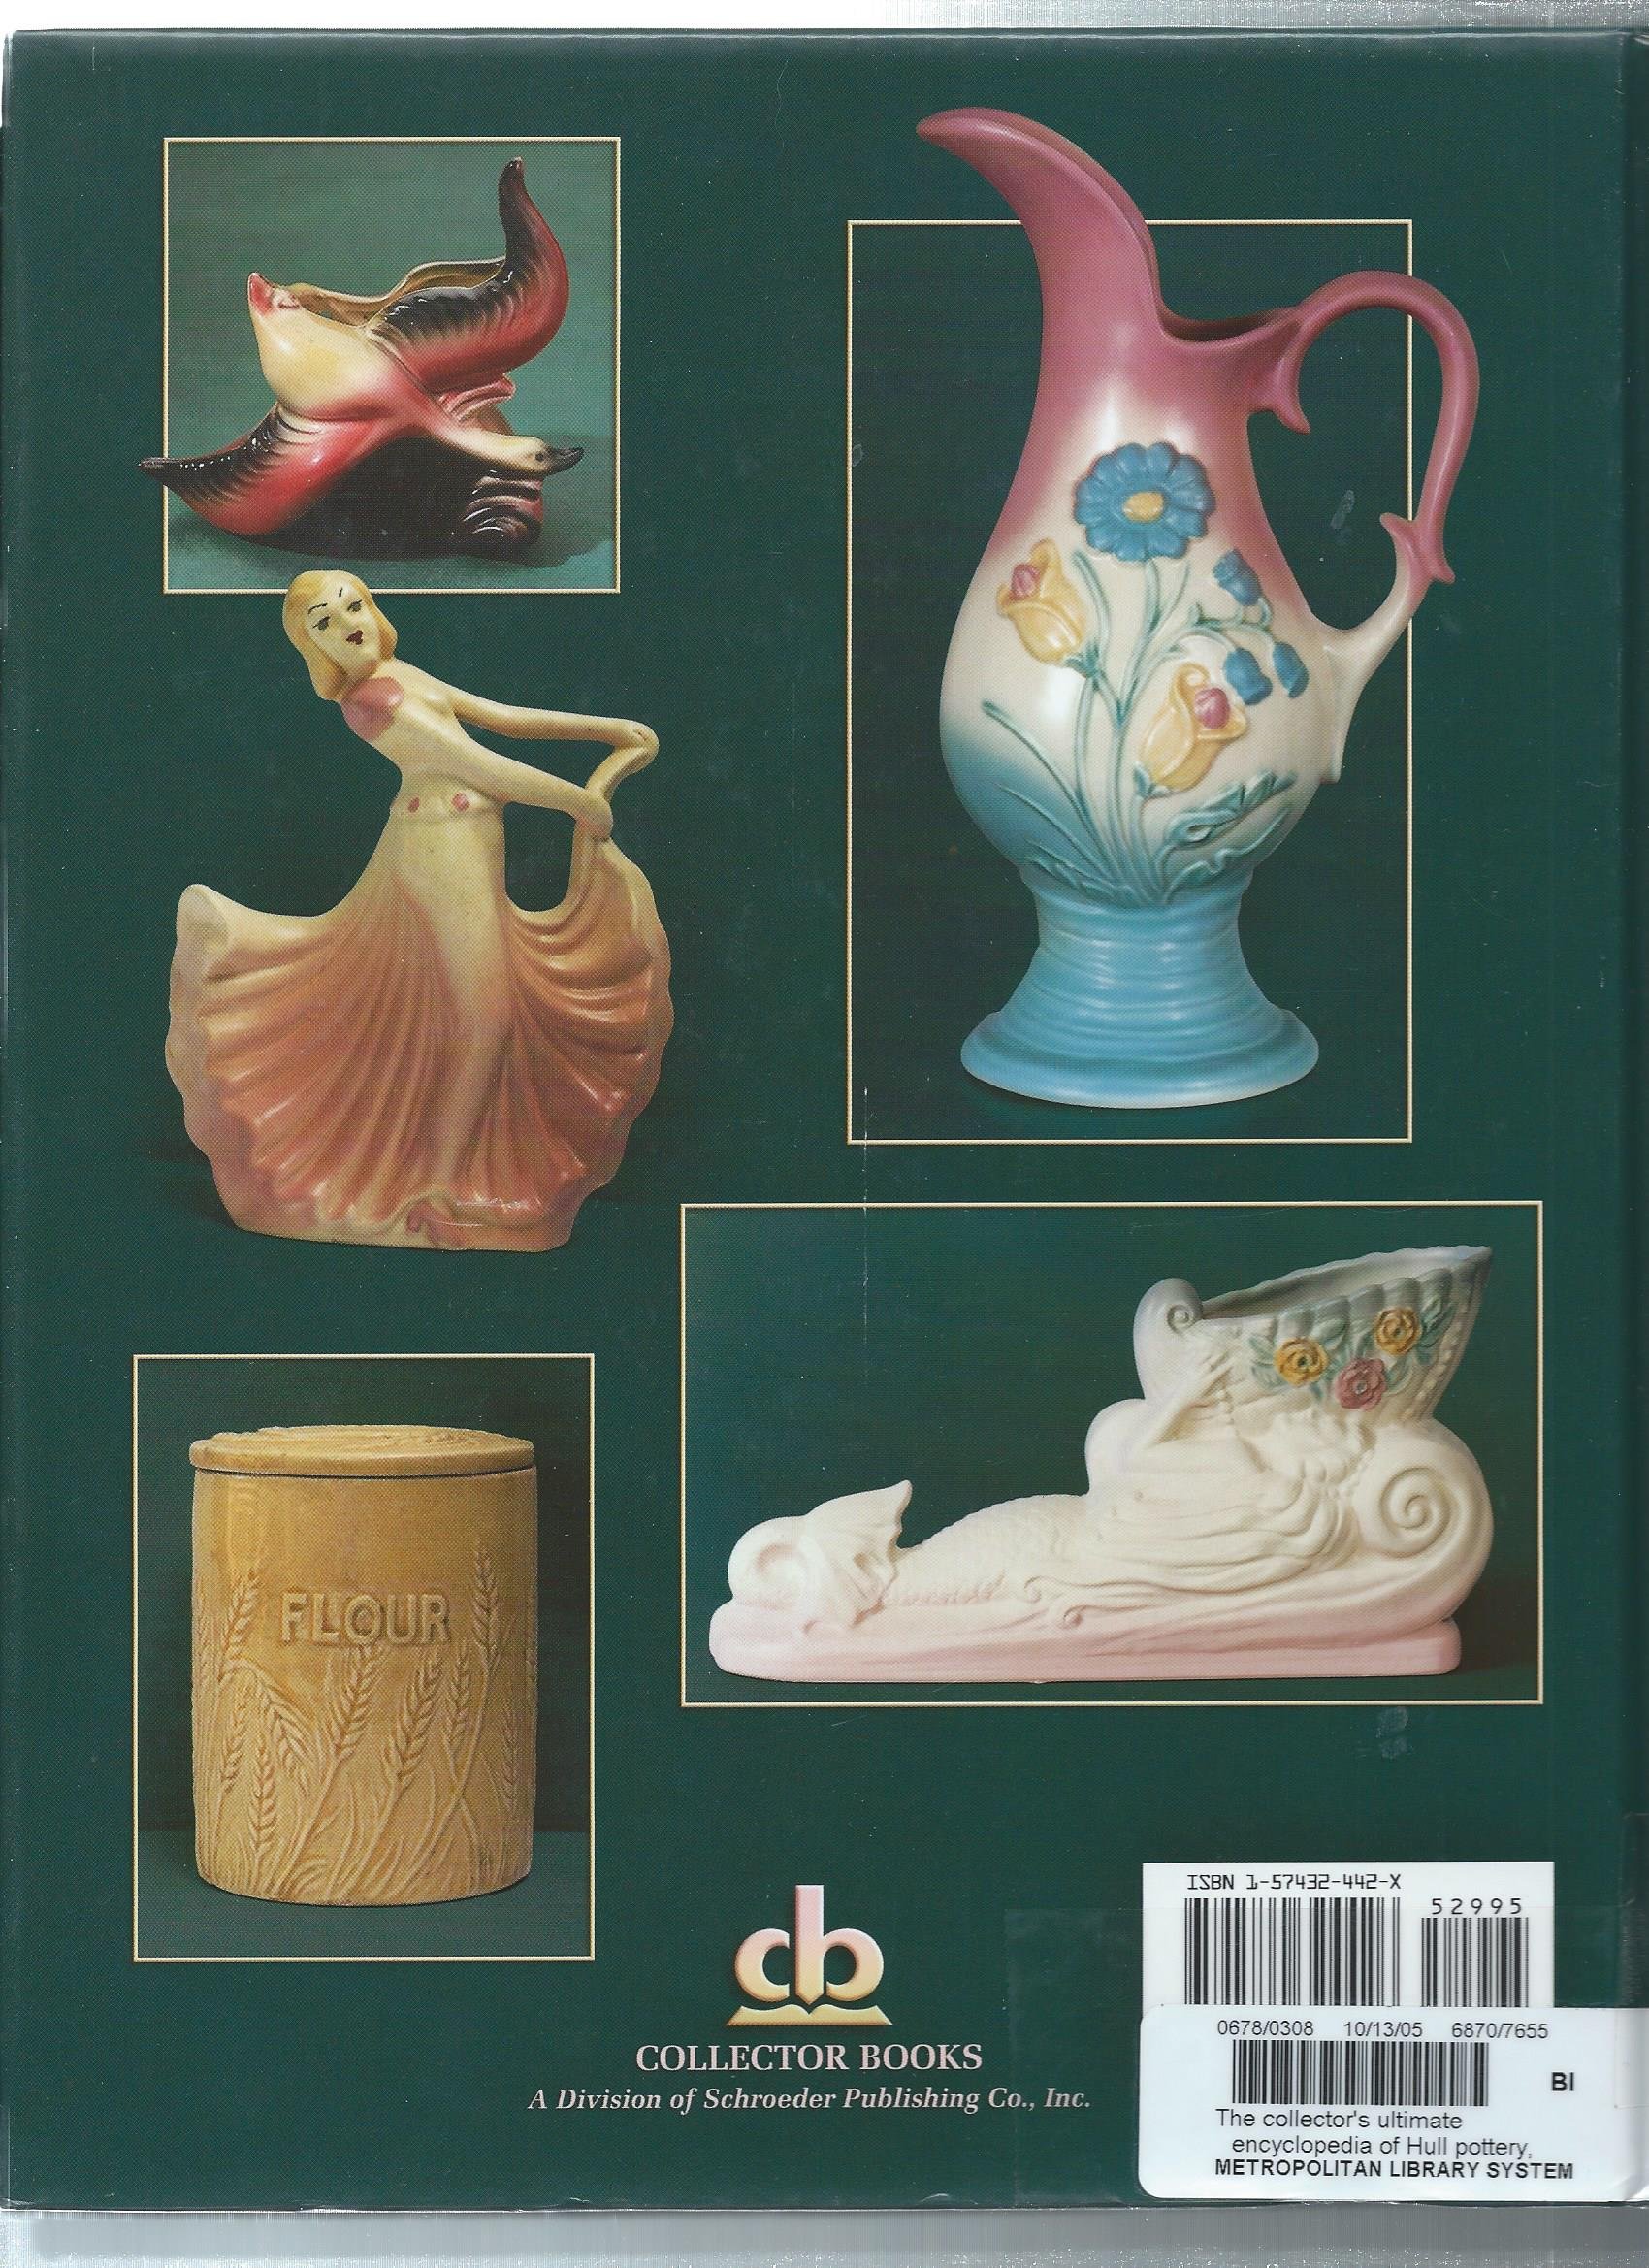 The Collector's Ultimate Encyclopedia of Hull pottery, Vol. 1: Identification and Values